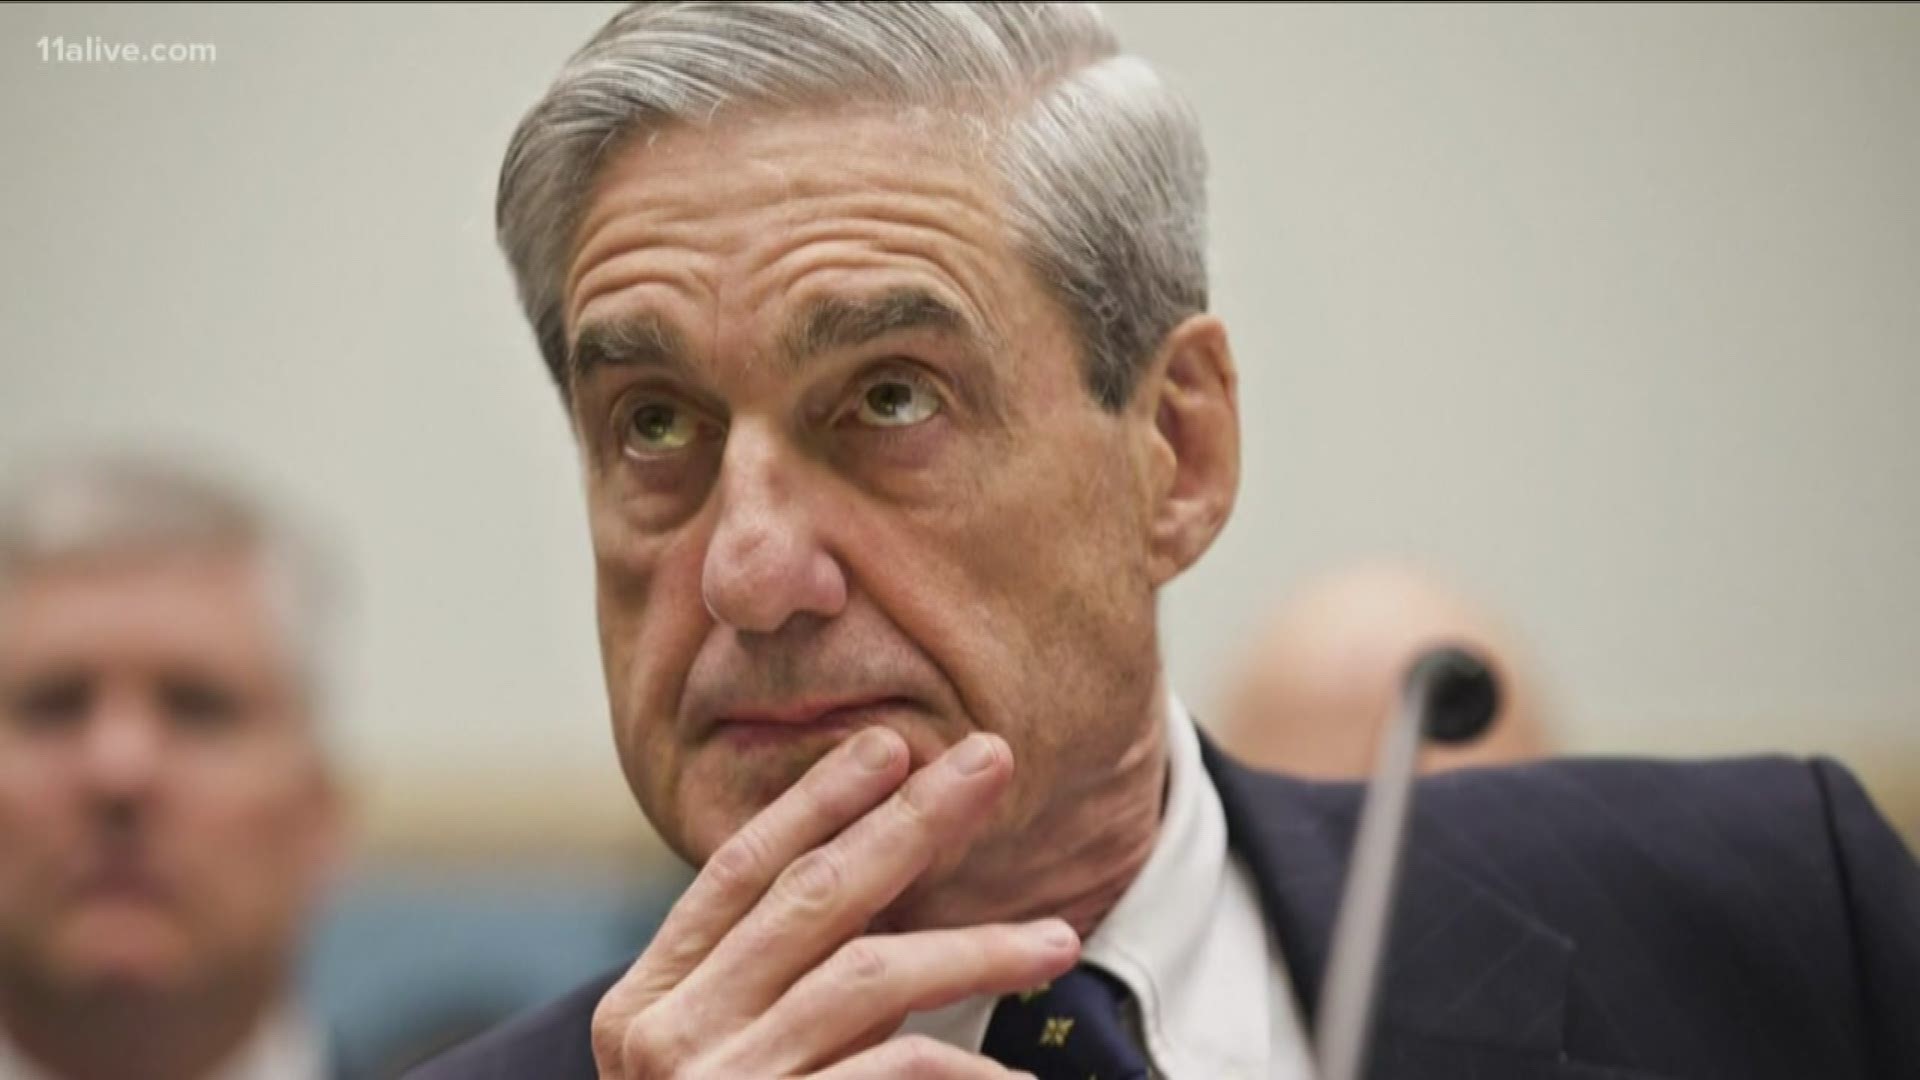 Public at last, special counsel Robert Mueller's report revealed to a waiting nation Thursday that President Donald Trump tried to seize control of the Russia probe and force Mueller's removal to stop him from investigating potential obstruction of justice by the president.